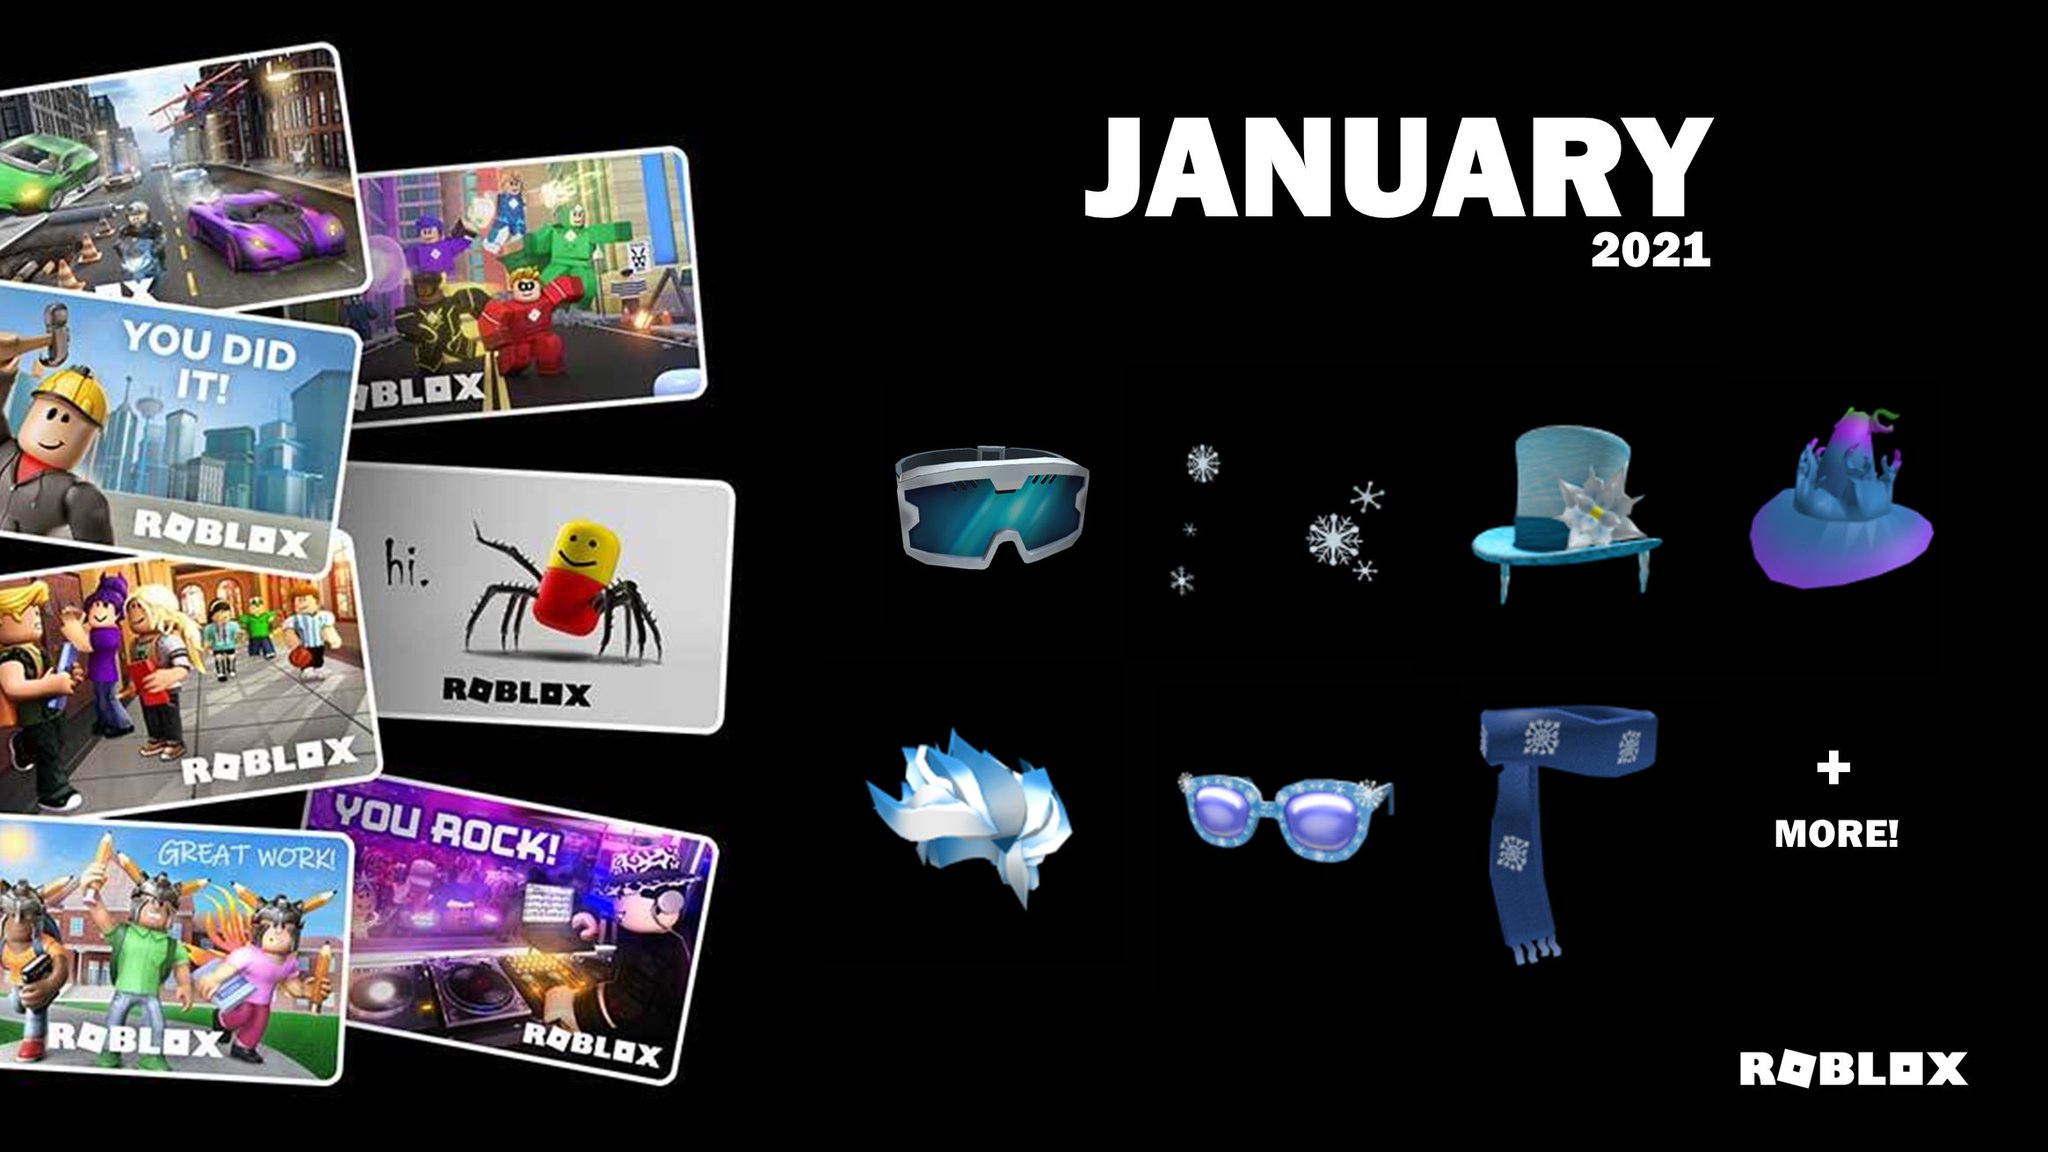 Bloxy News On Twitter The Roblox Gift Card Virtual Items And Their Corresponding Stores For January 2021 Are Now Available Check Them Out Here Https T Co Pujwqlz5yt Purchase A Gift Card - roblox card indonesia